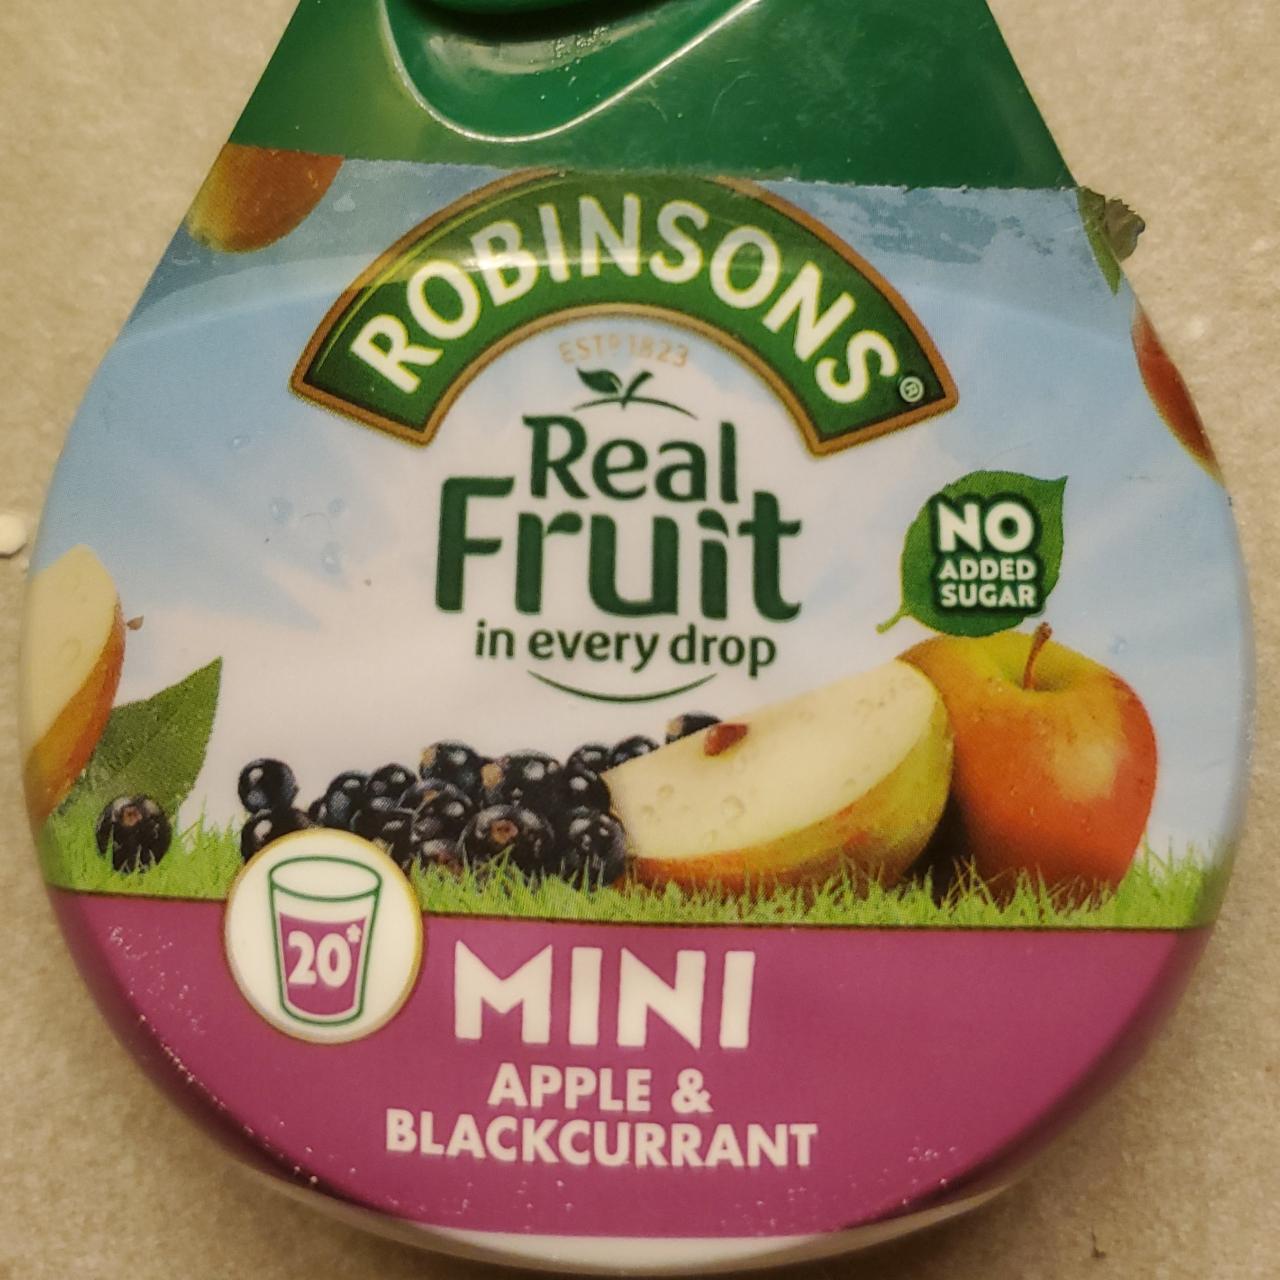 Real fruit in every drop mini apple & blackcurrant Robinsons